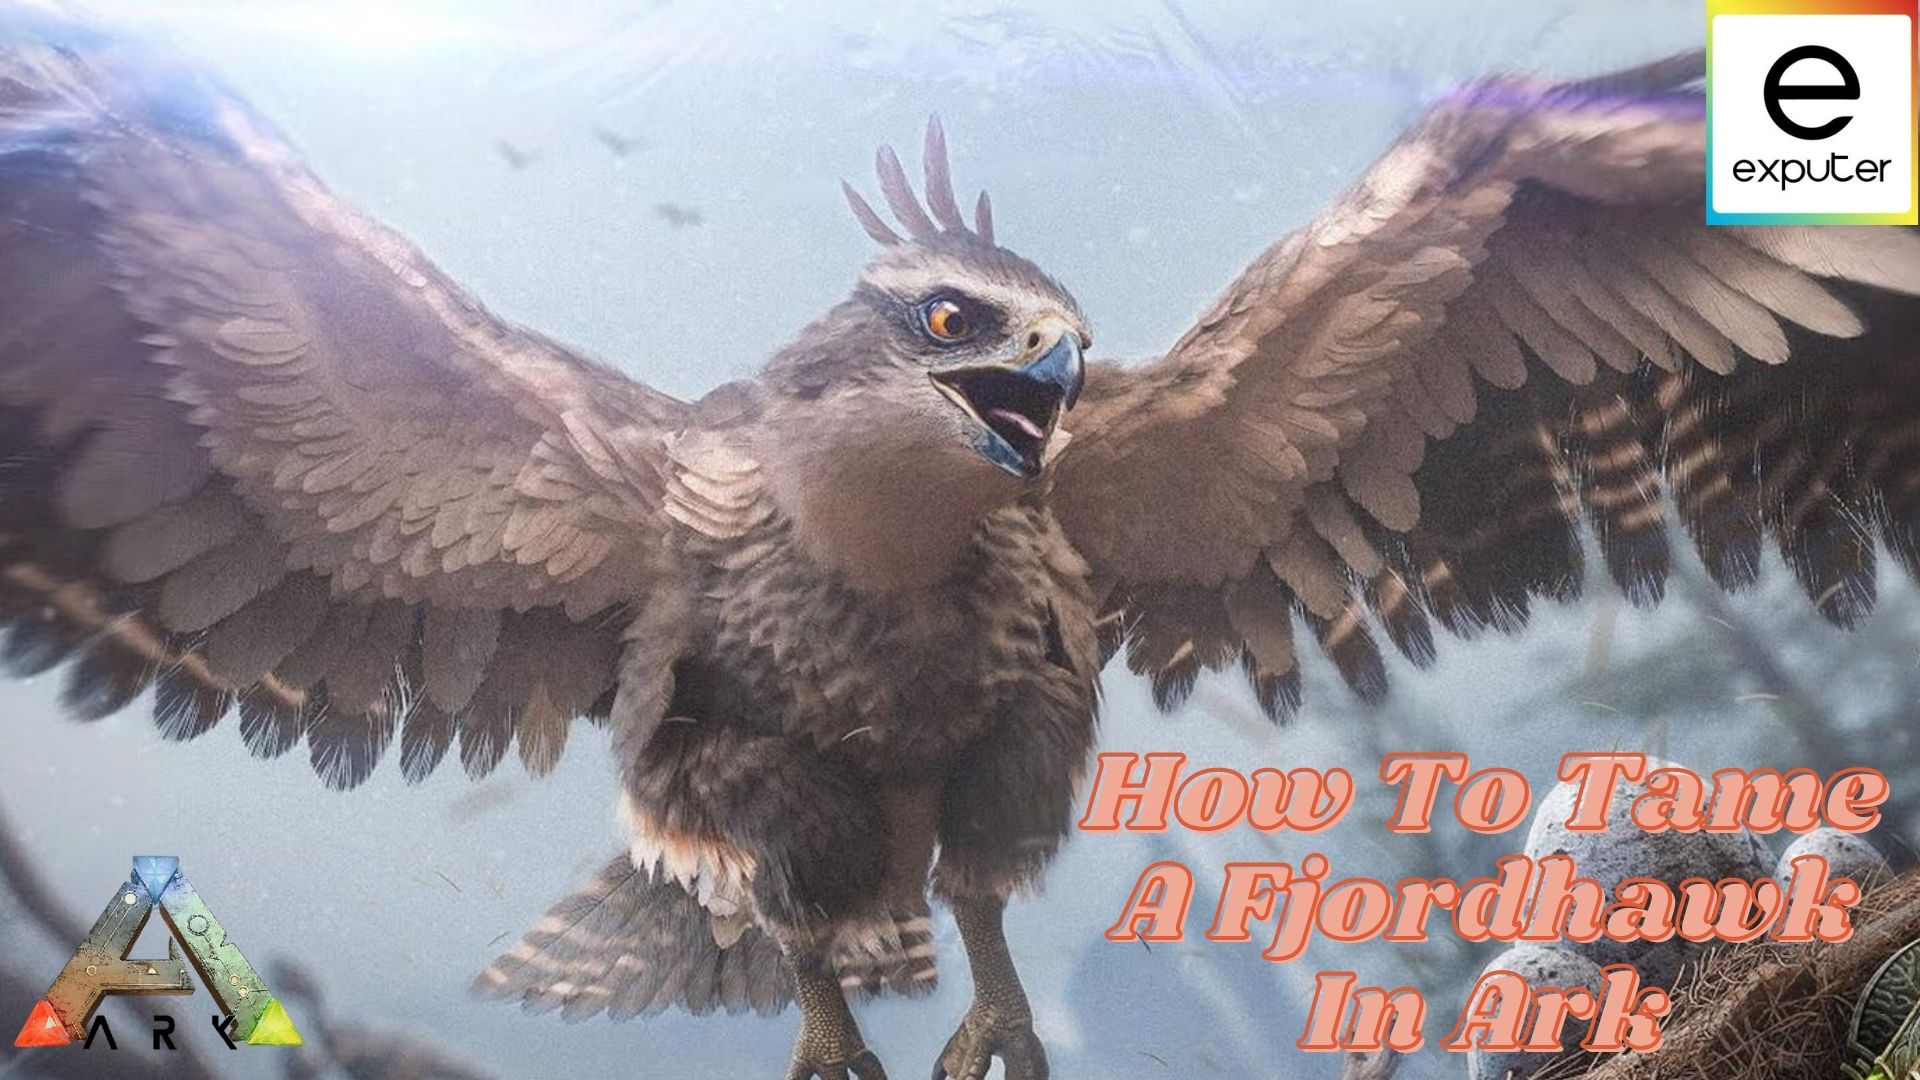 rules to tame A Fjordhawk In Ark